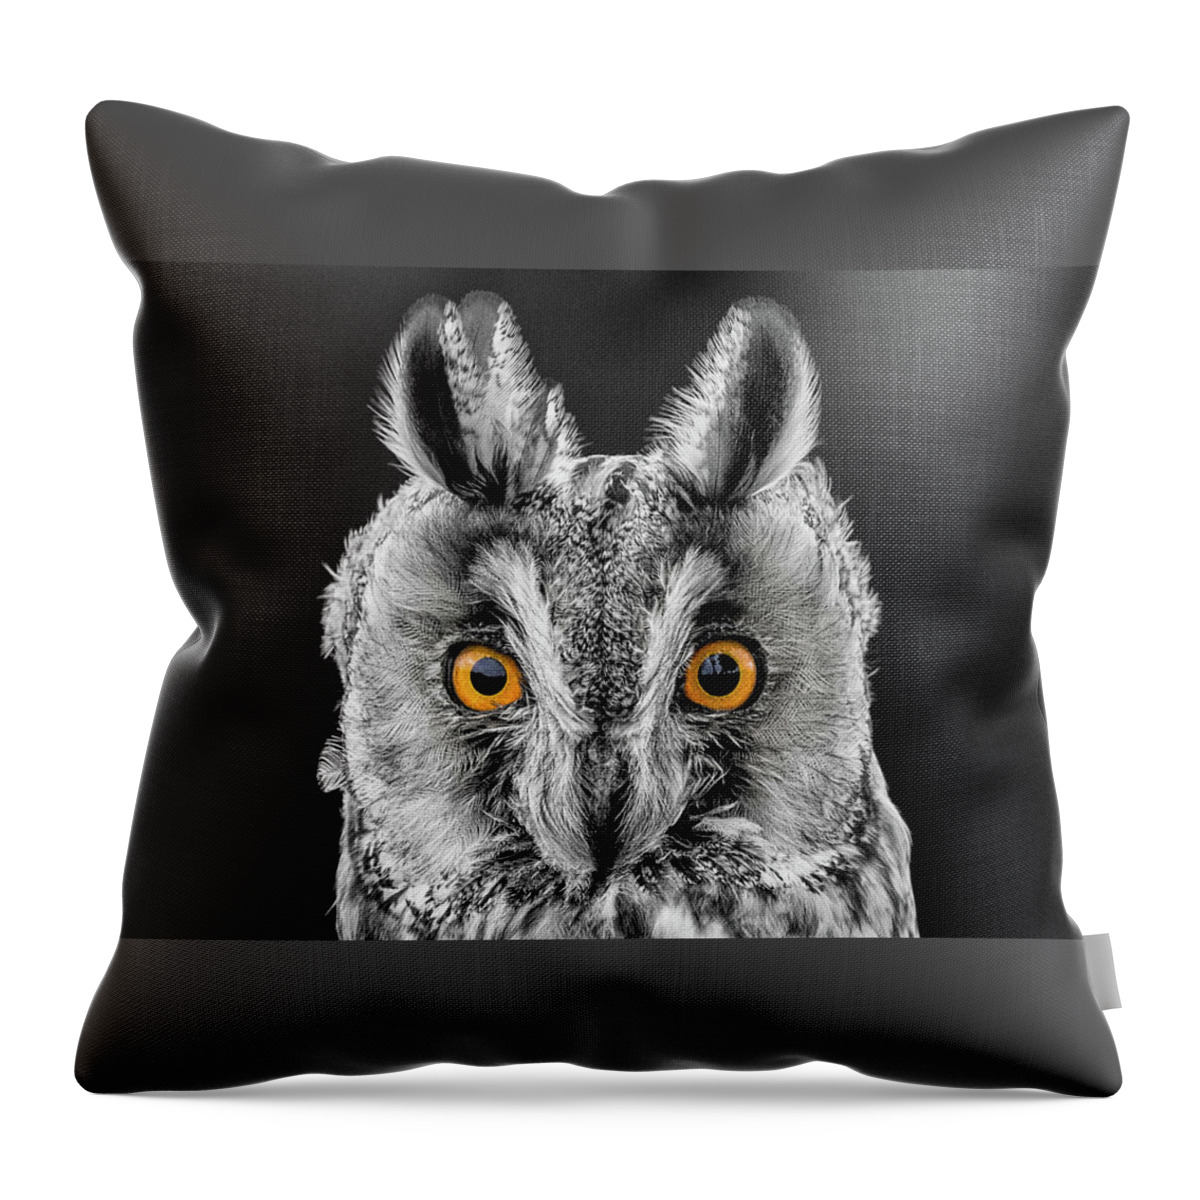 Long Eared Owl Throw Pillow featuring the photograph Long Eared Owl 2 by Nigel R Bell